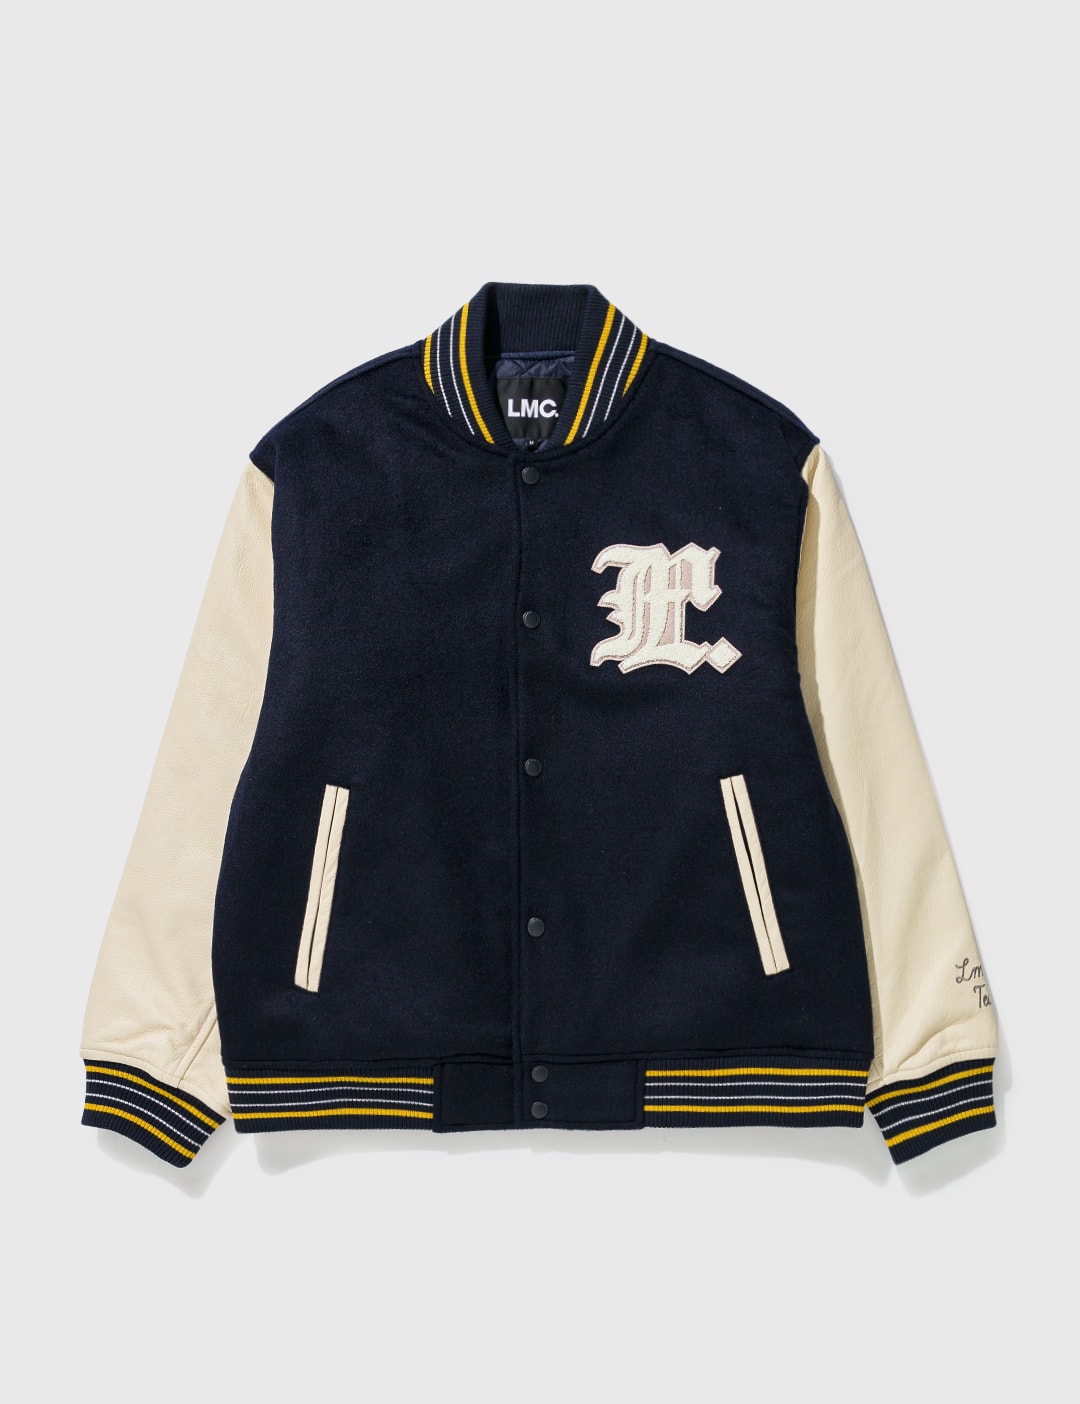 LMC - Angel Wool Varsity Jacket | HBX - Globally Curated Fashion and ...